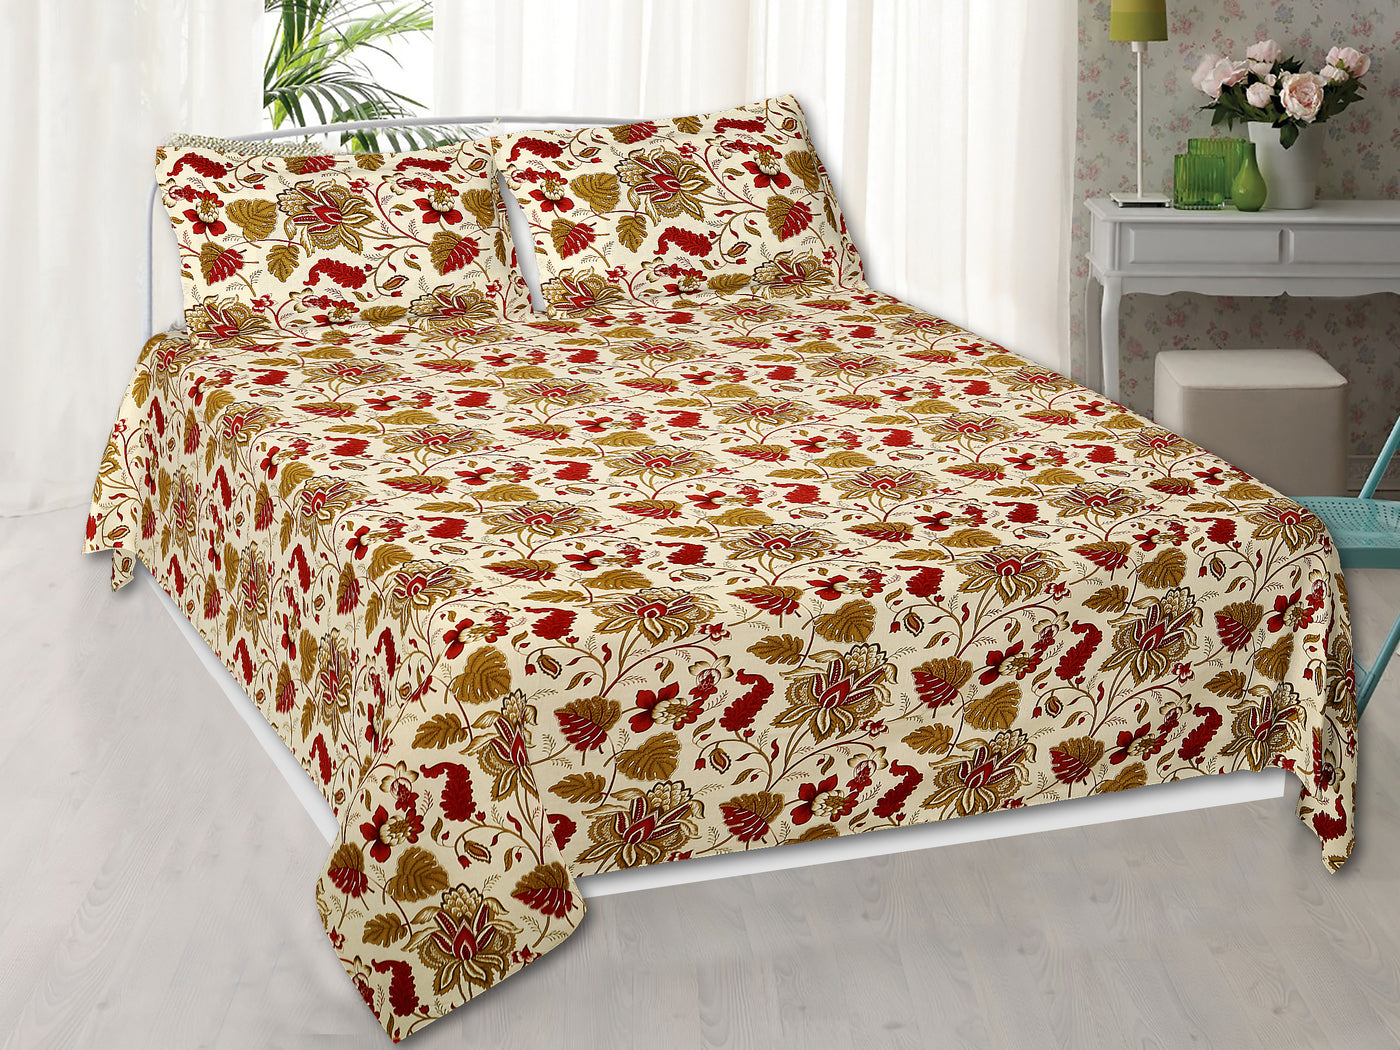 Braise Premium | Full Size 90 x 108 in | 100% Pure Cotton | Double Bedsheet with 2 Pillow Covers (ANKI01)